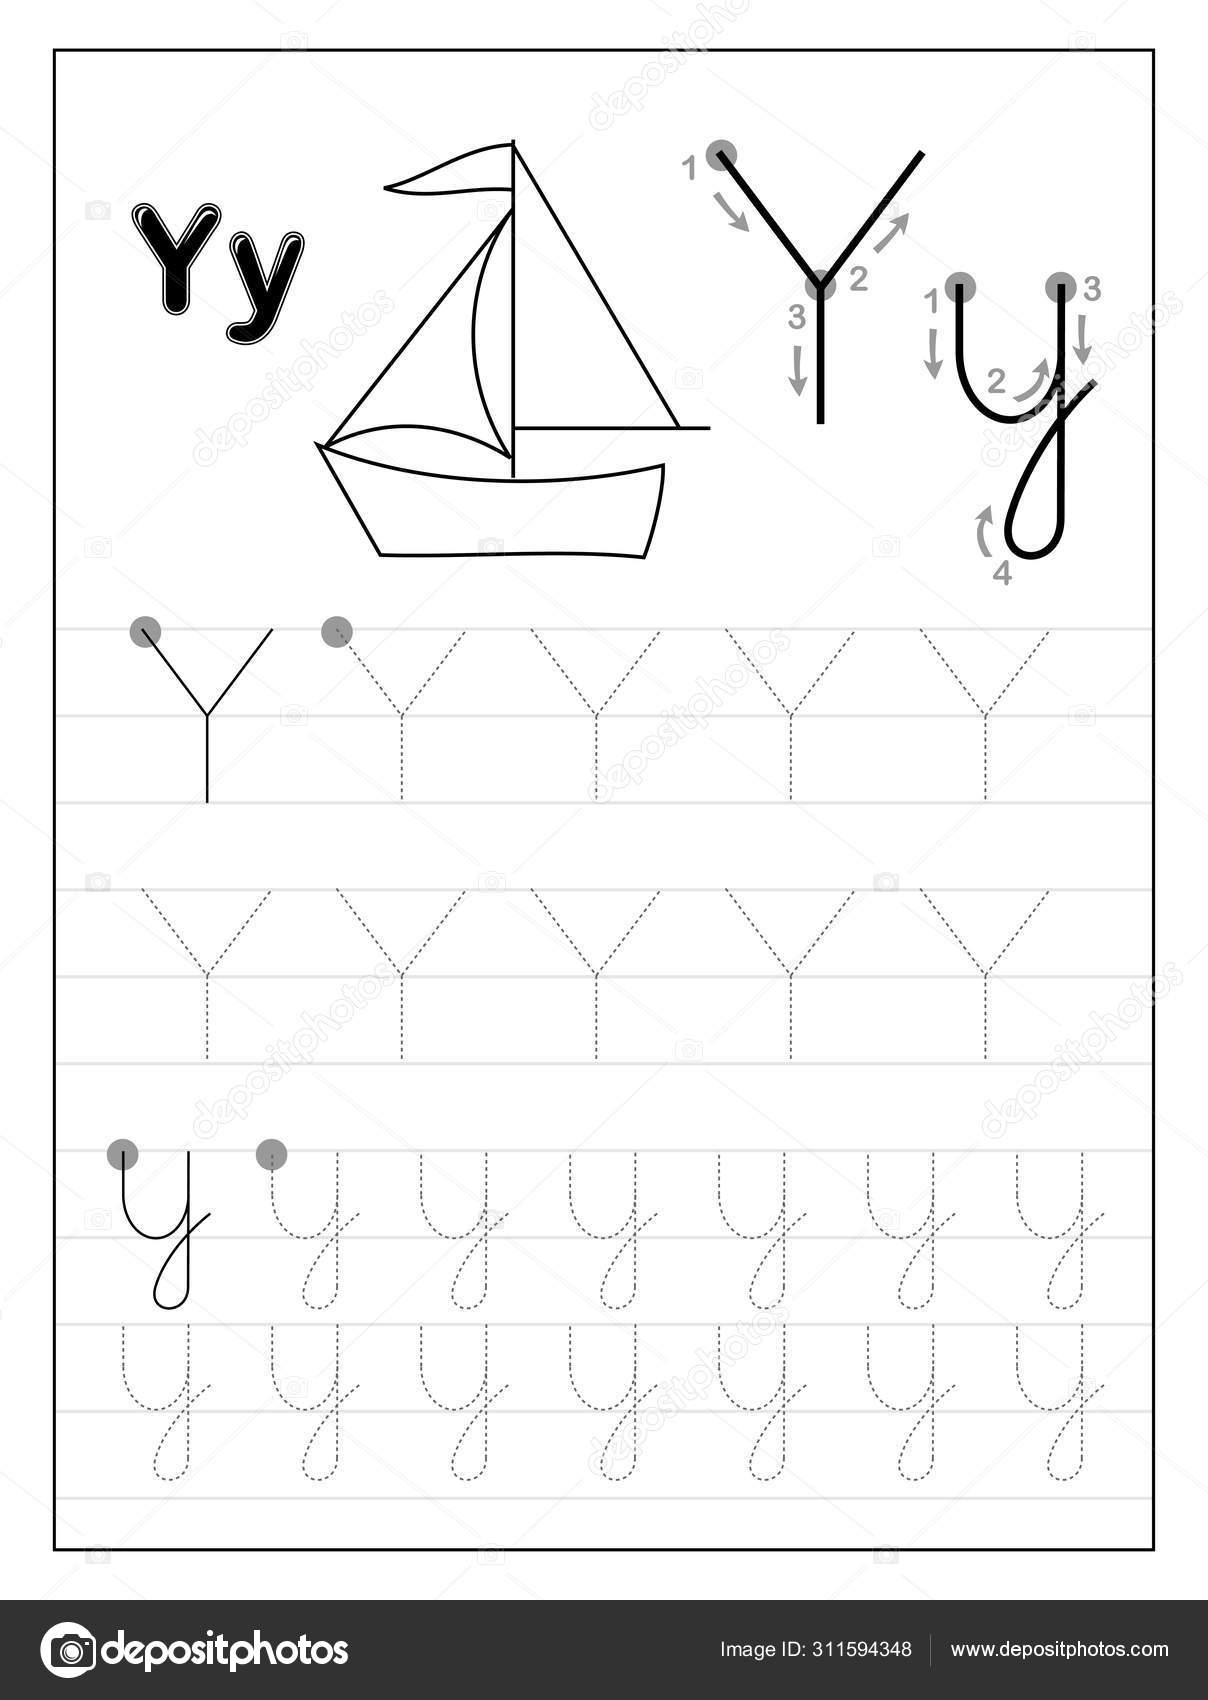 Tracing Alphabet Letter Y. Black And White Educational Pages On Line For Kids. Printable Worksheet For Children Textbook. Developing Skills Of